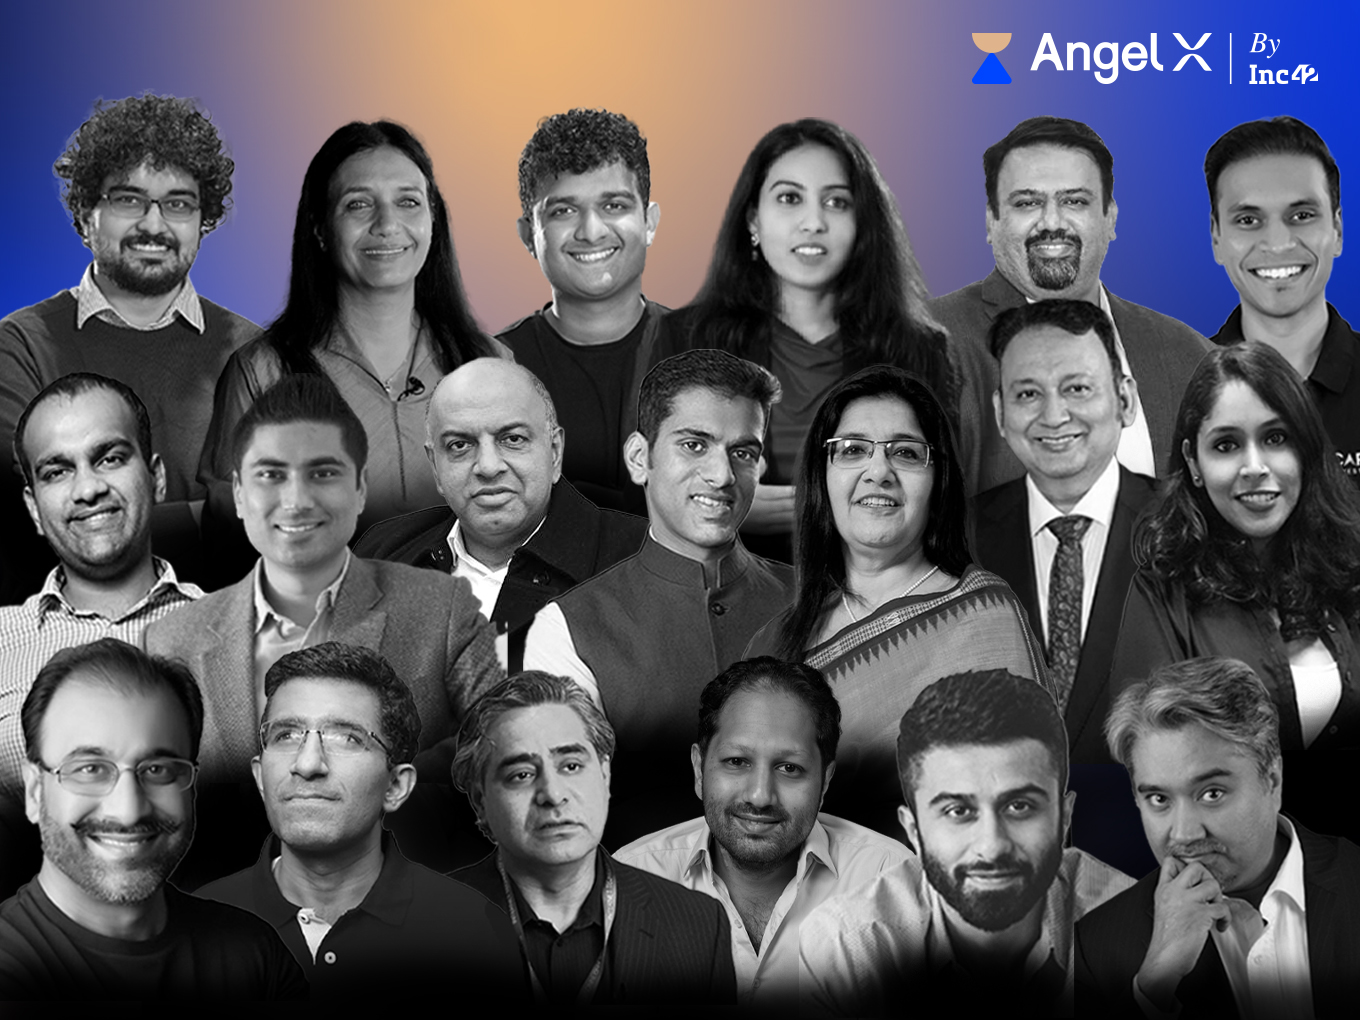 Learn The A To Z Of Angel Investing From India’s Top 1% Angels At AngelX By Inc42